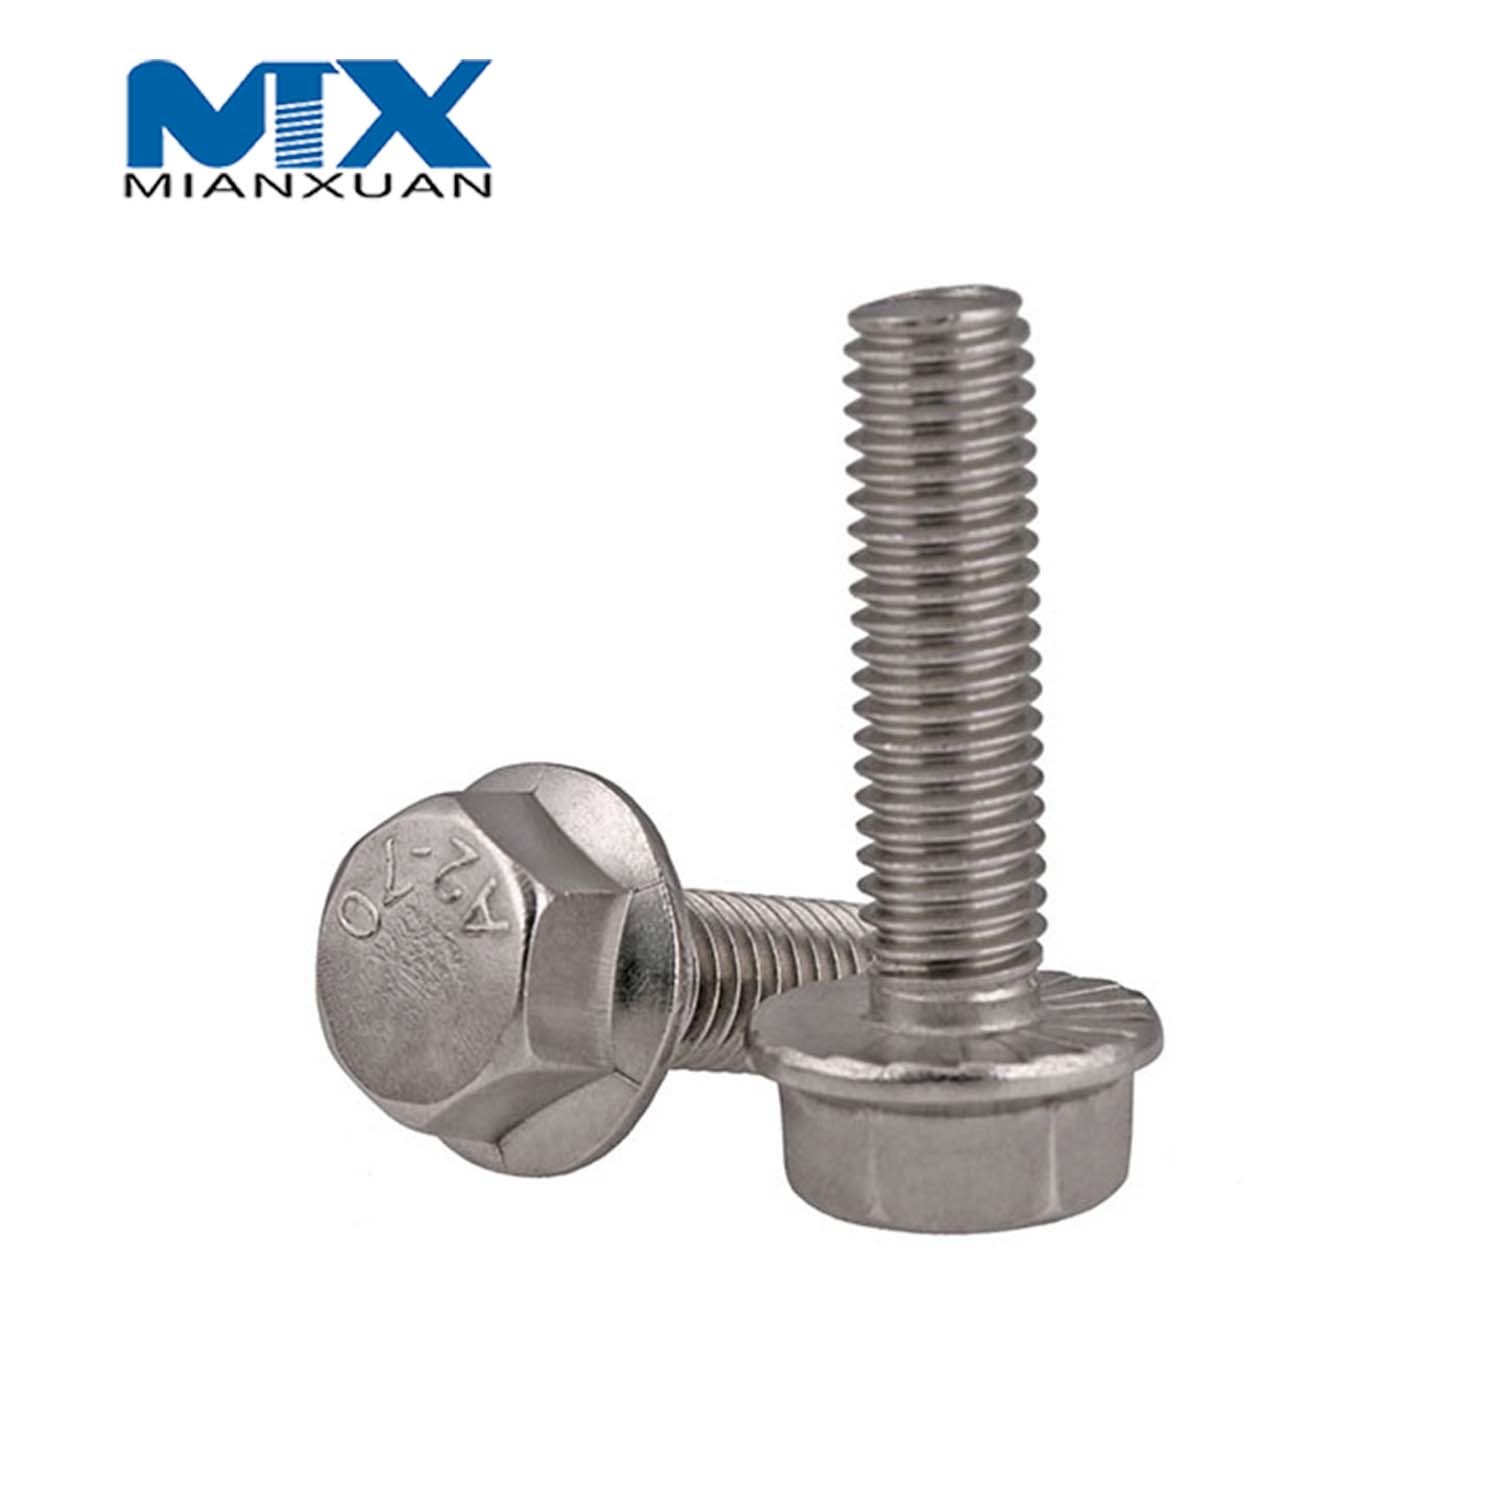 DIN6921 Hex Head Bolt Stainless Steel with Knurled No-Knurled